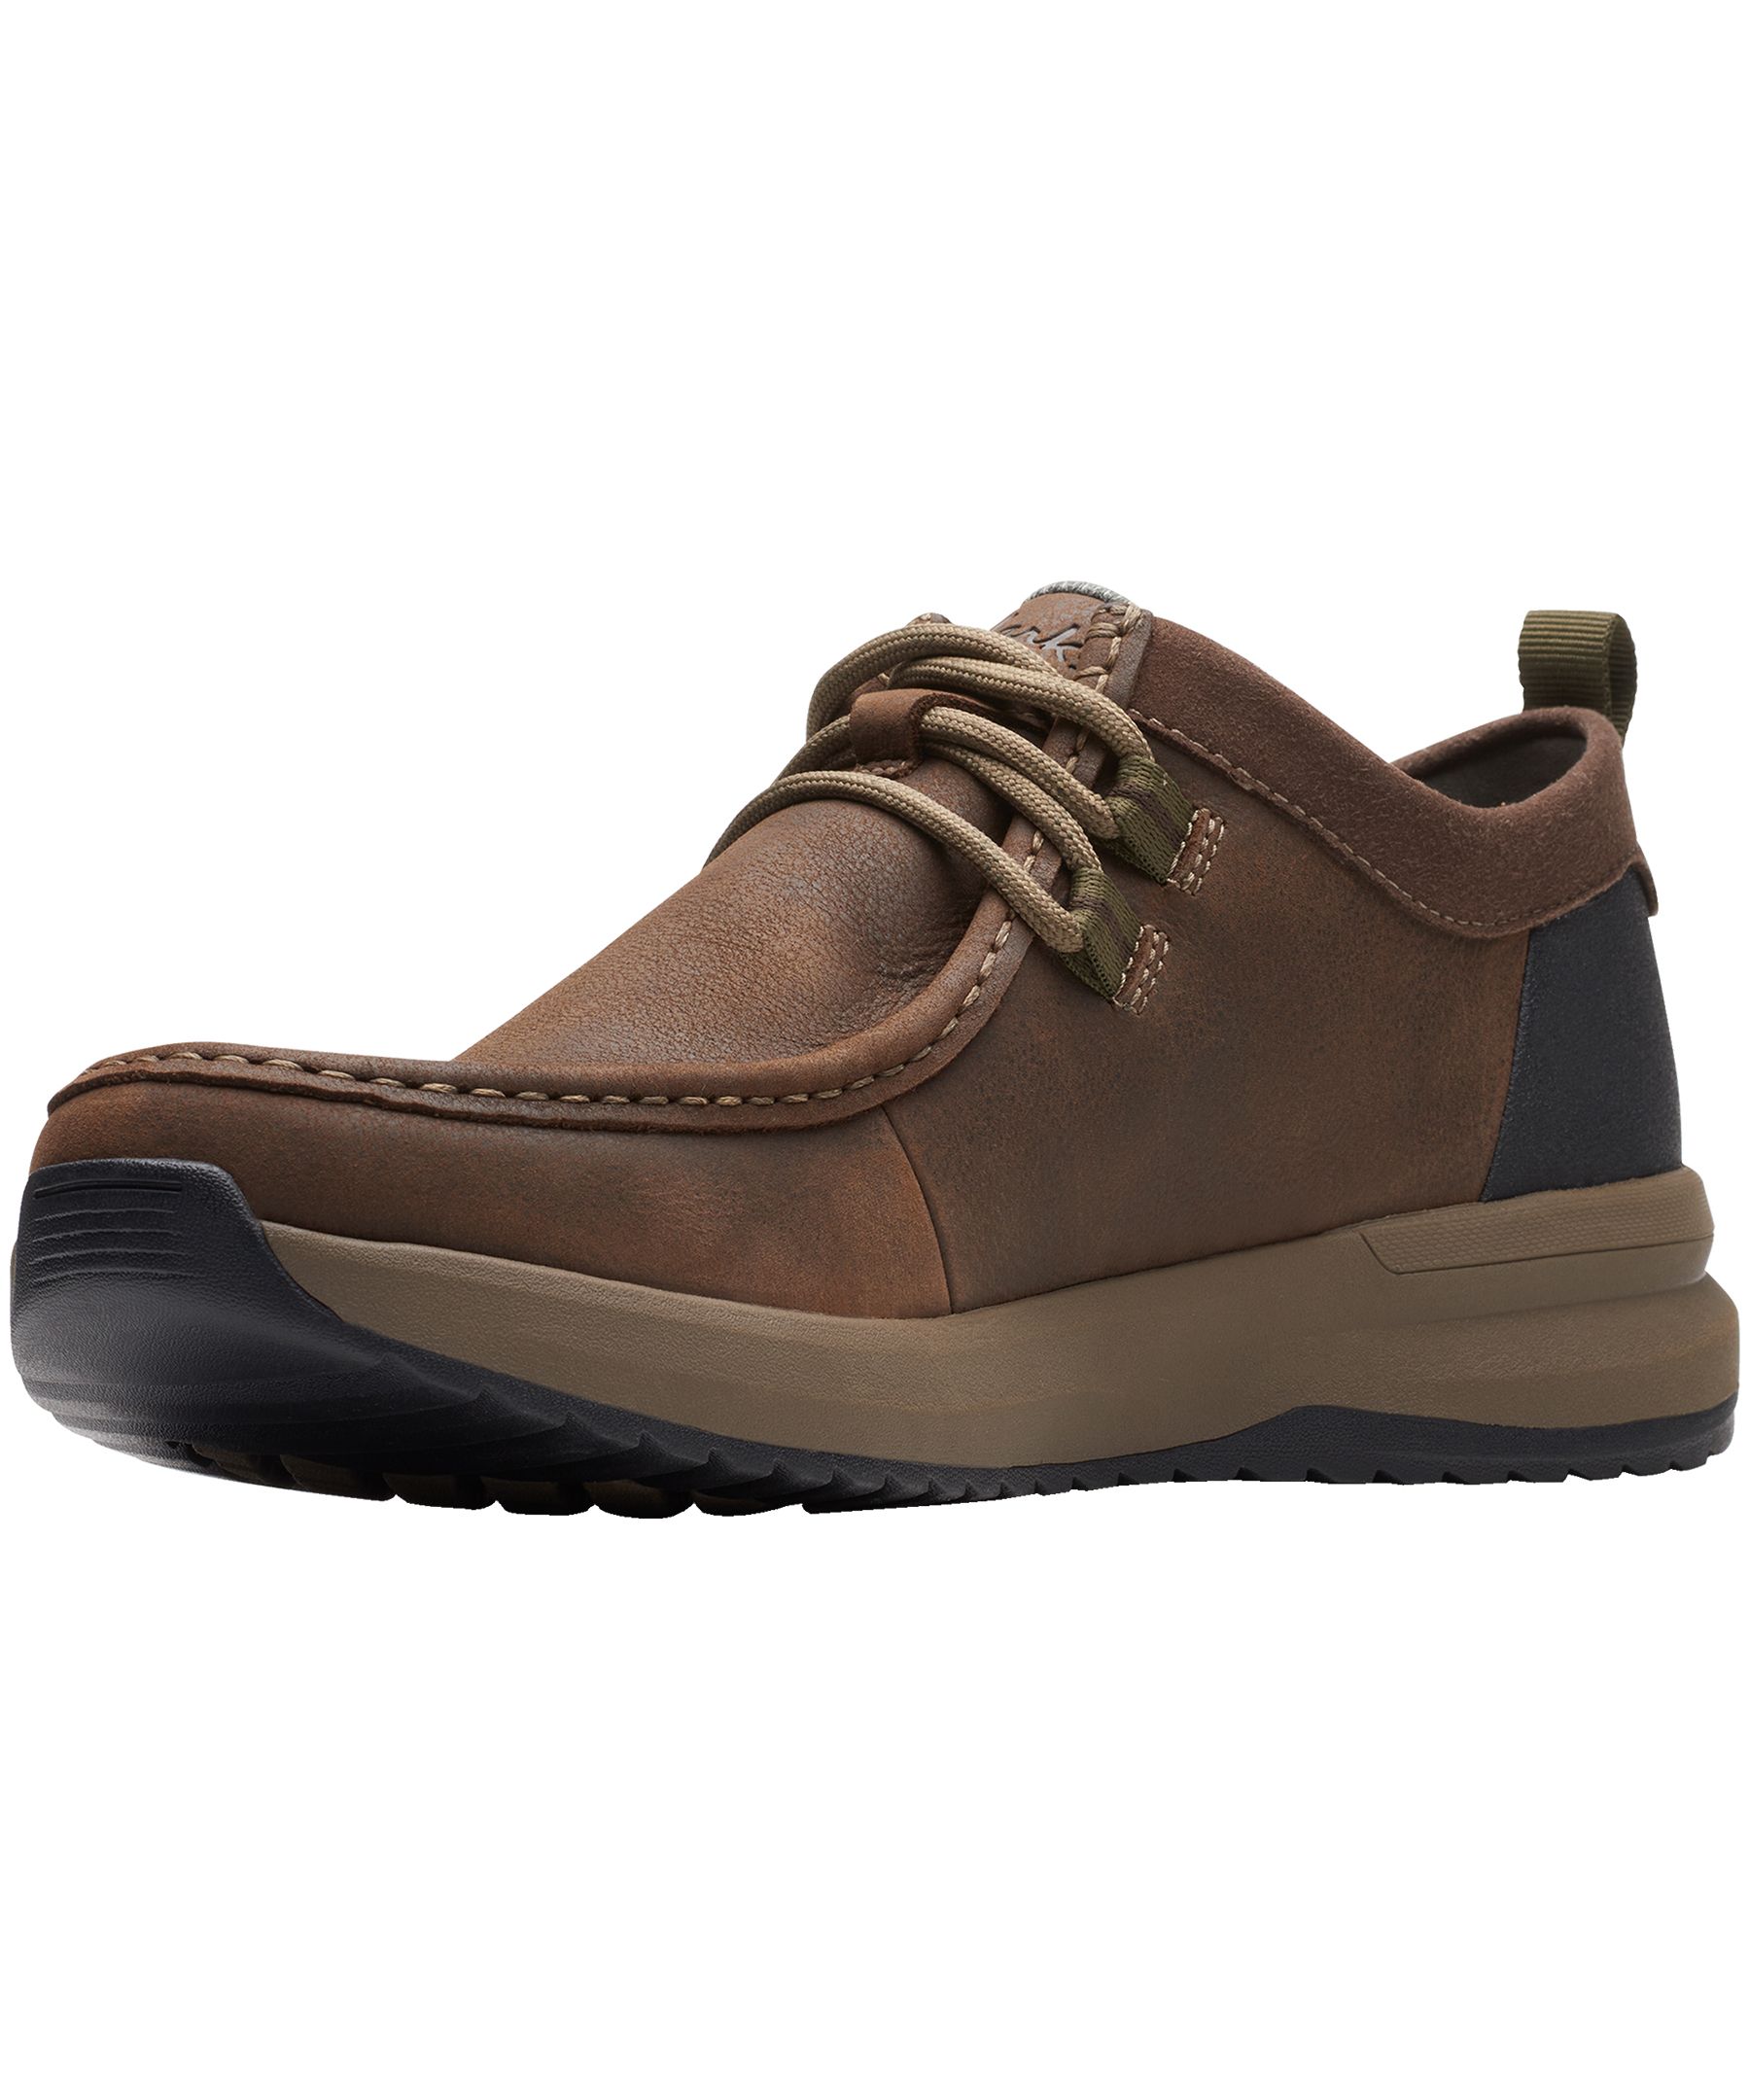 Timberland Men's Lincoln Peak Lite Waterproof Leather Pull On Shoes - Brown